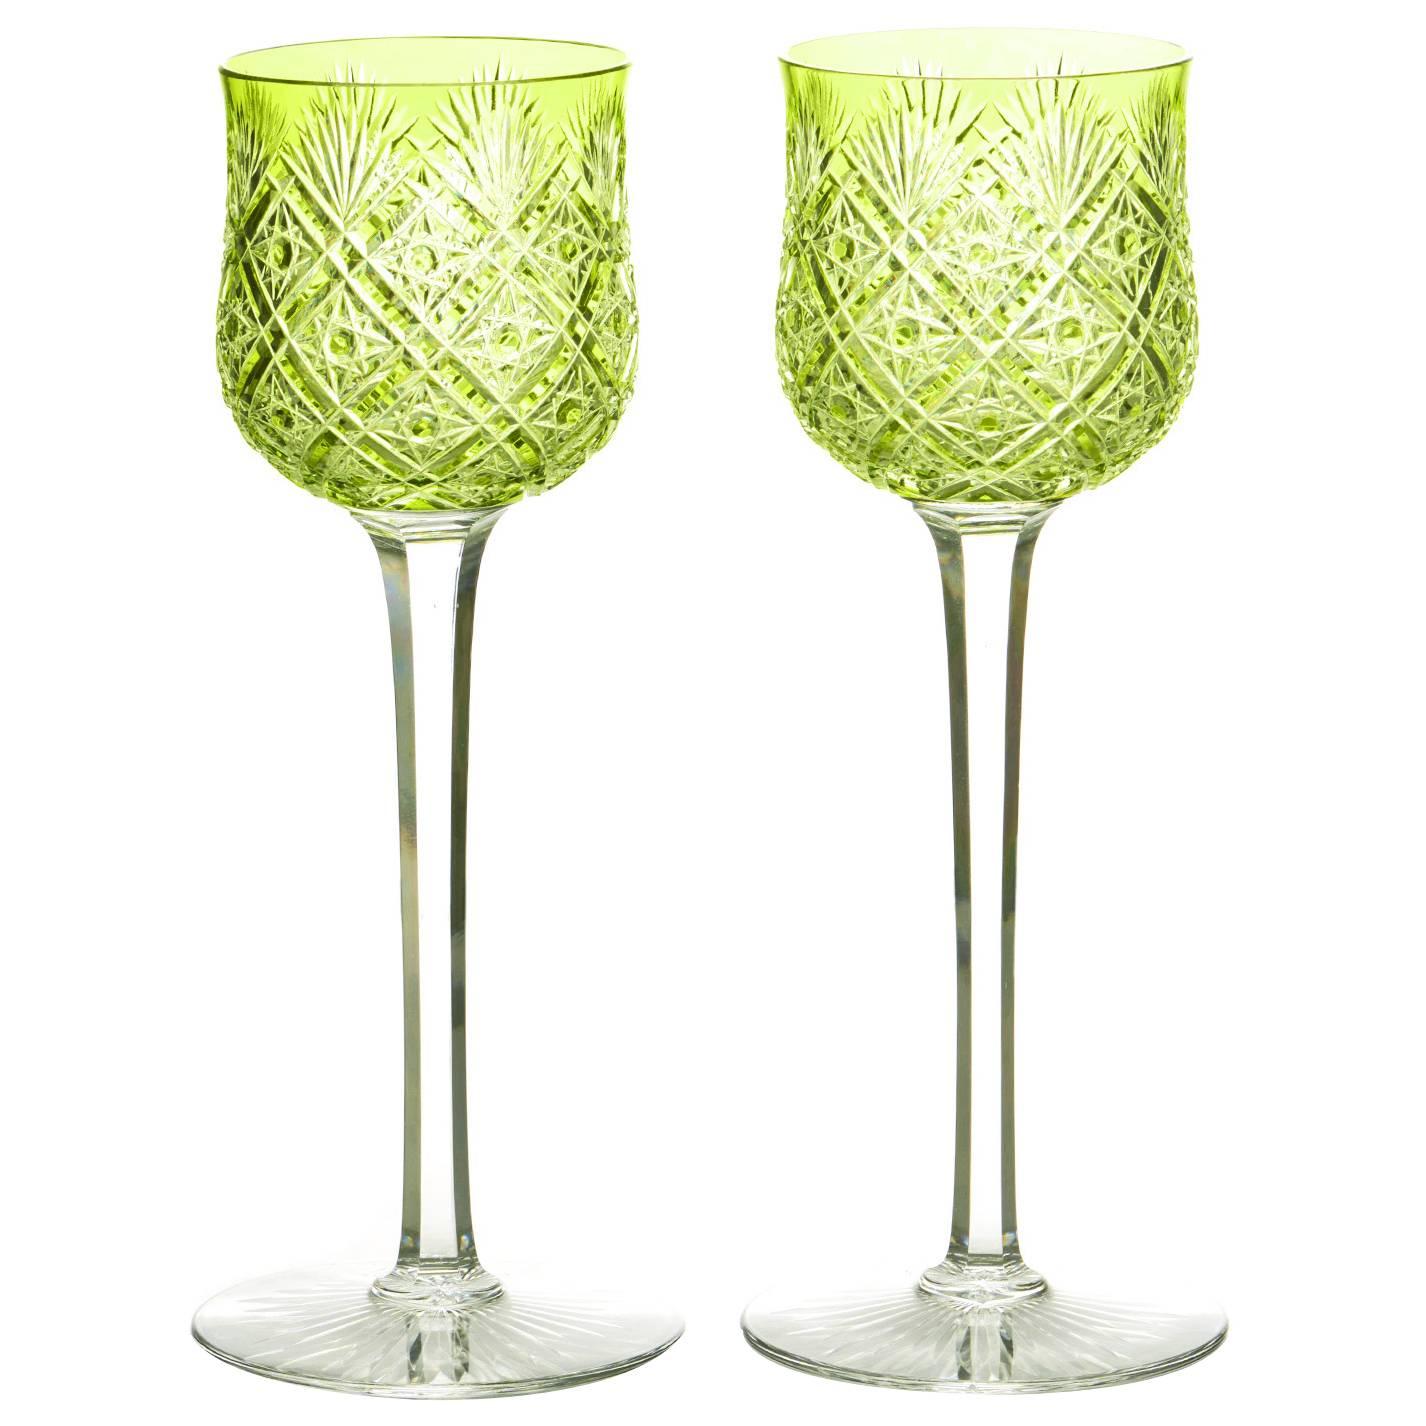 12 Baccarat Cut Crystal Wine Goblets in Chartreuse